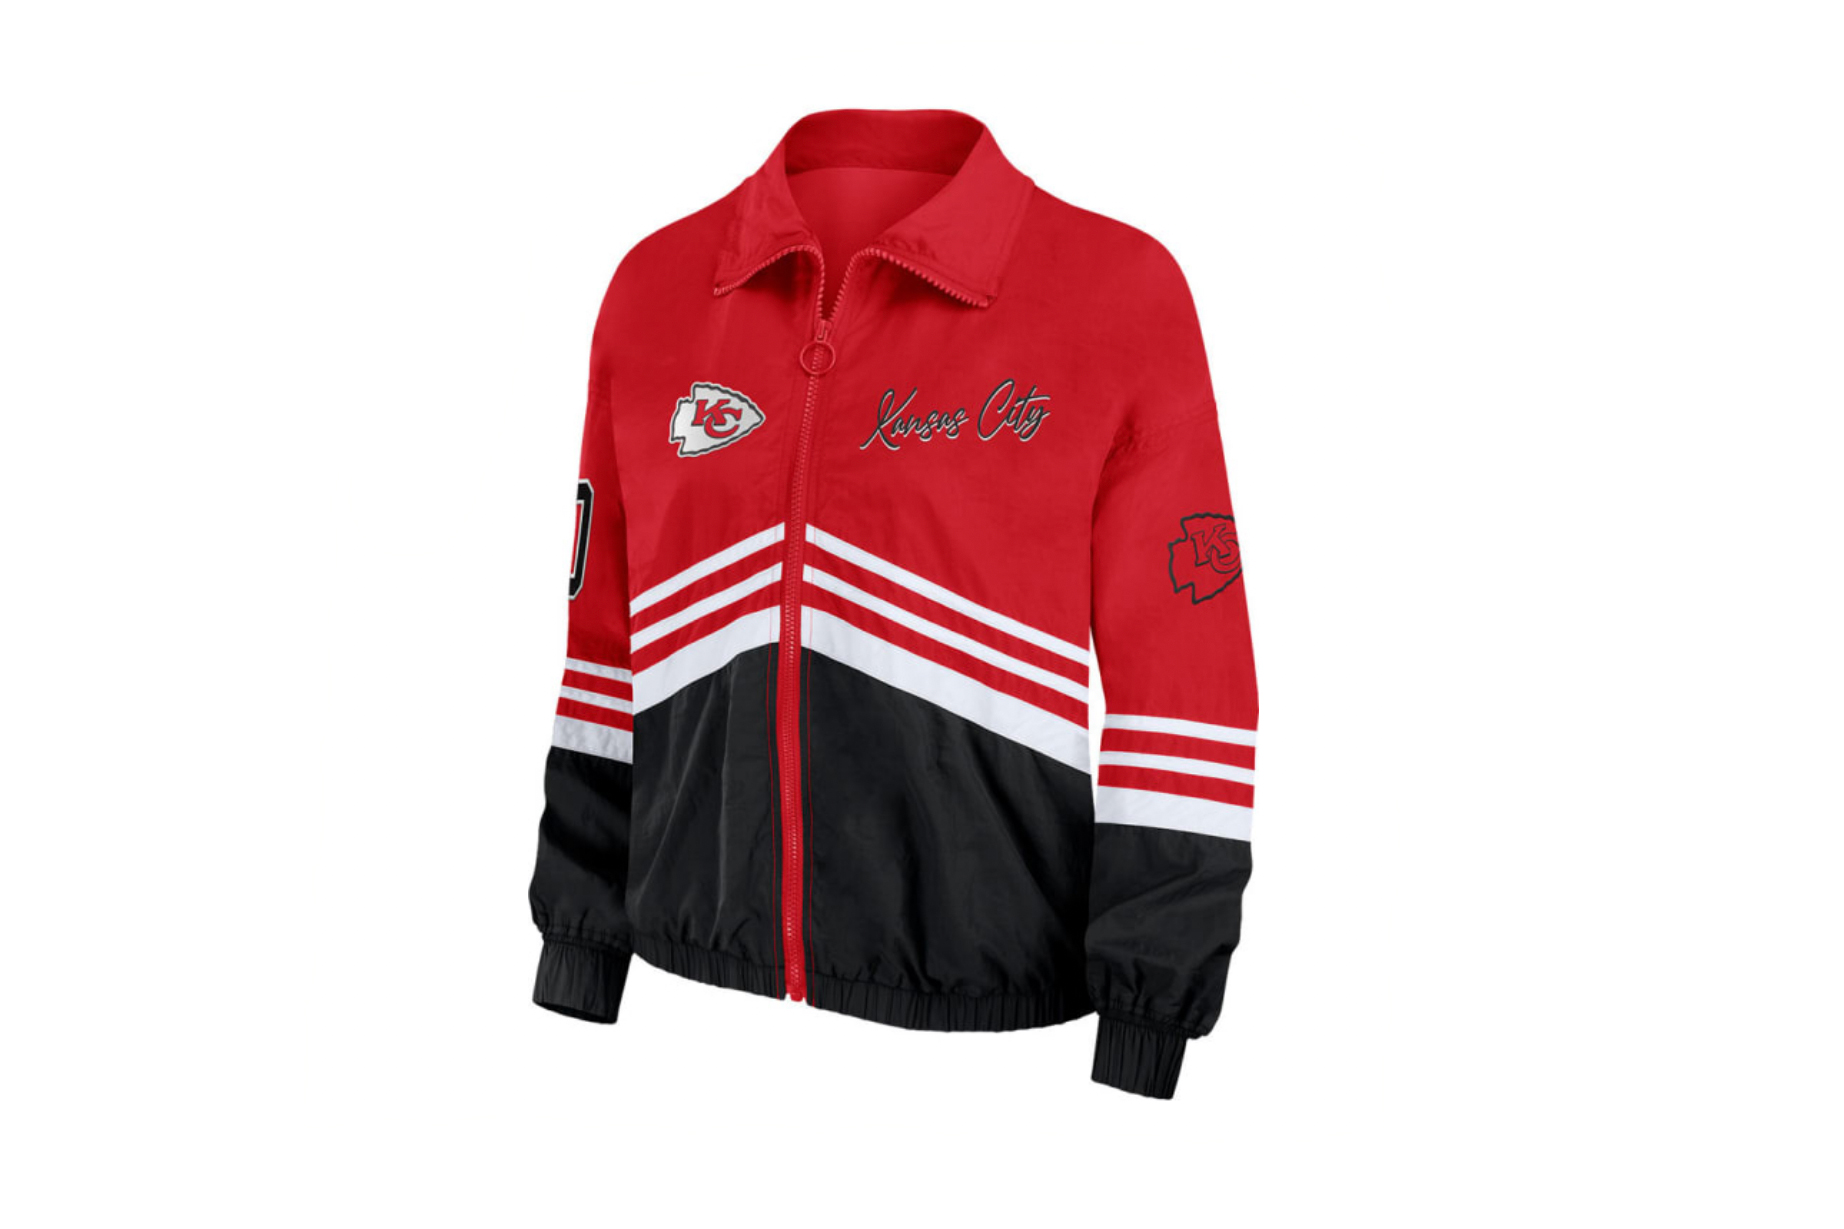 Where did Taylor Swift get her Chiefs jacket? Her game day fit revealed